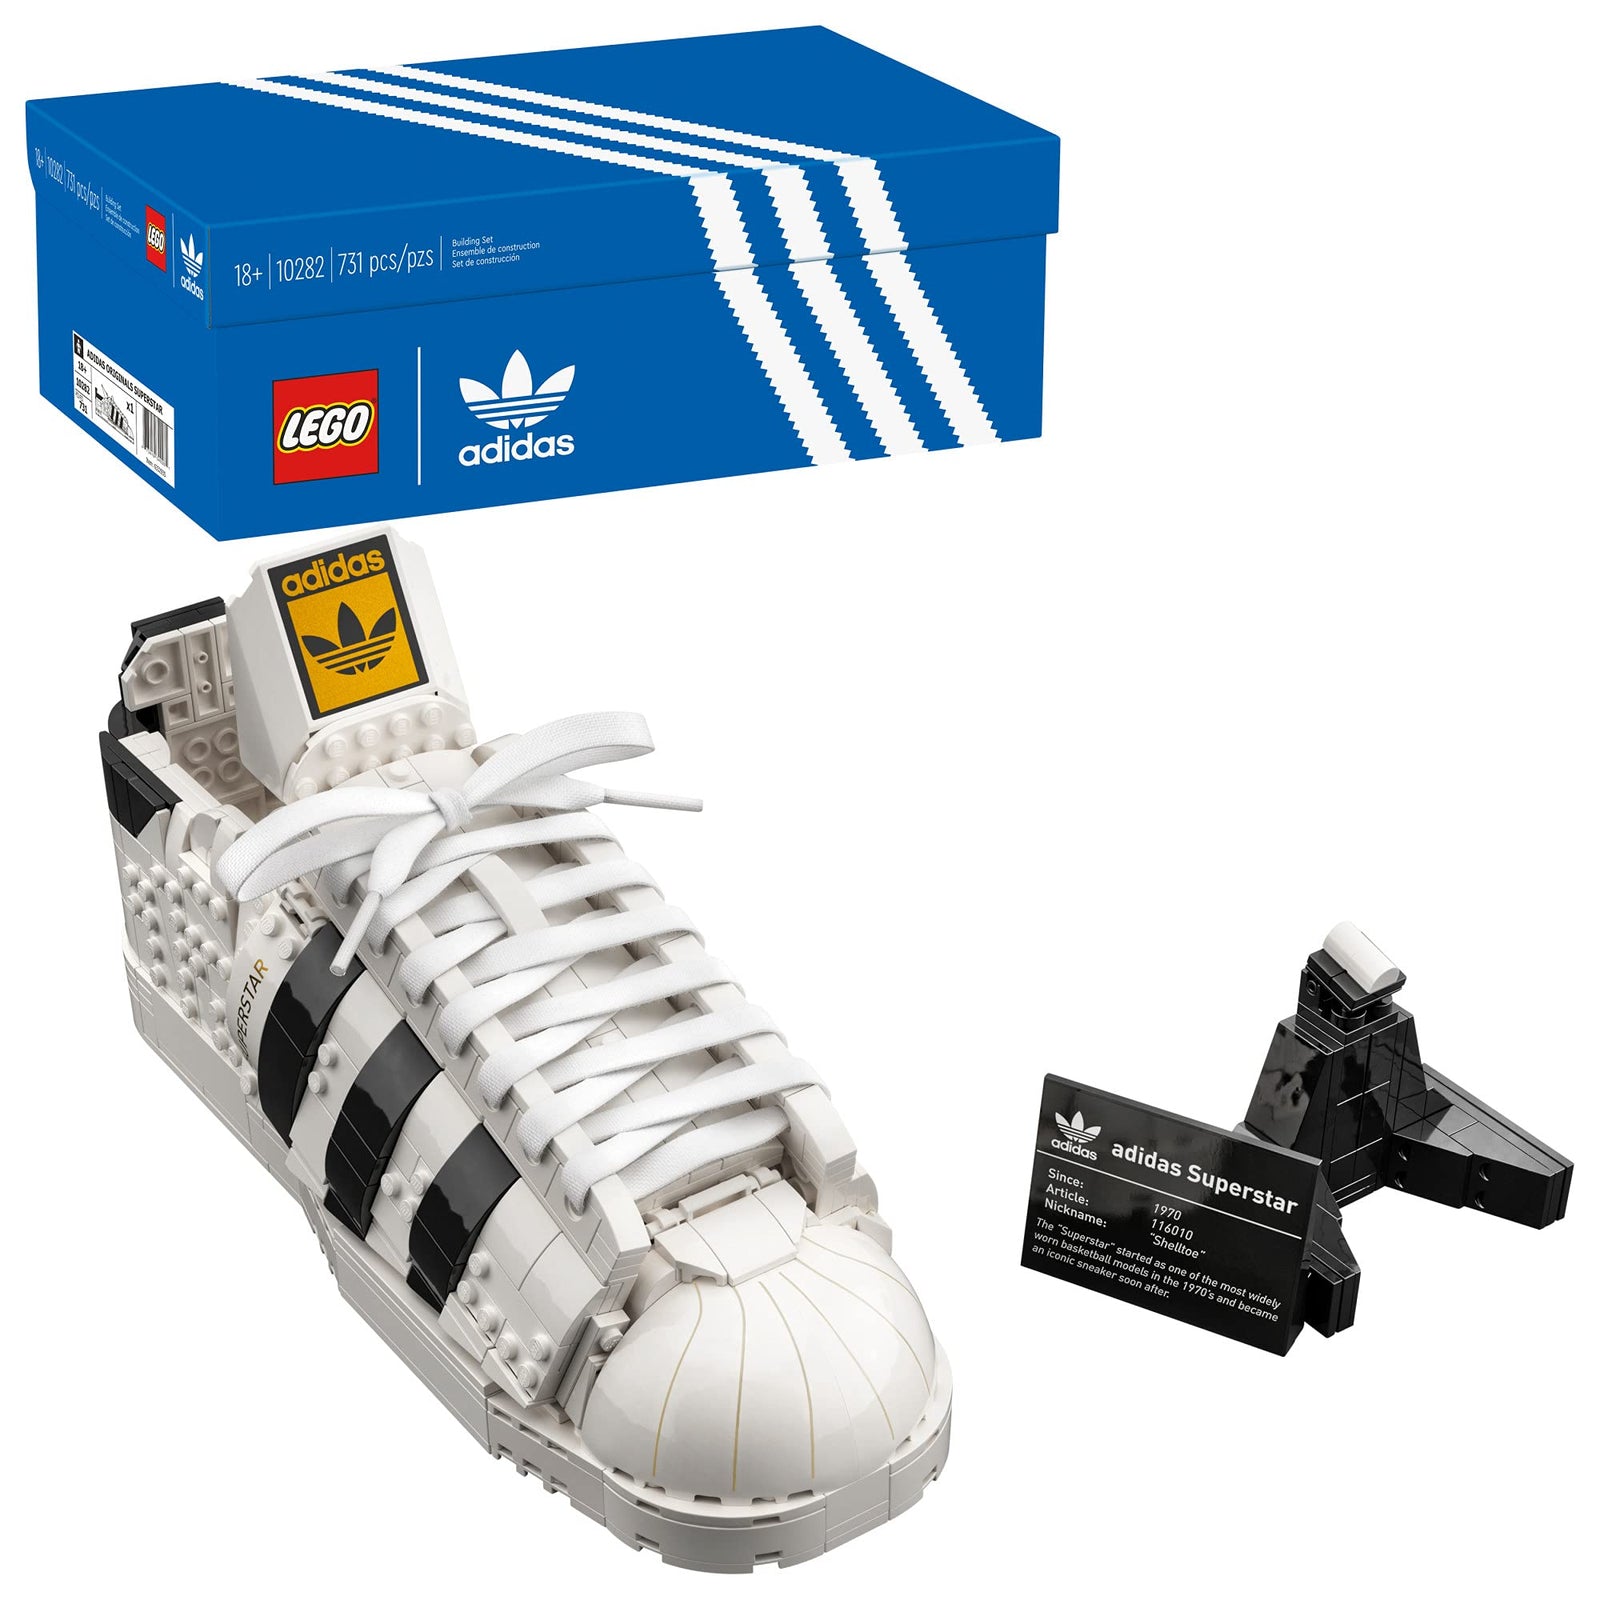 LEGO Adidas Originals Superstar 10282 Building Kit; Build and Display The Iconic Sneaker; New 2021 (731 Pieces)